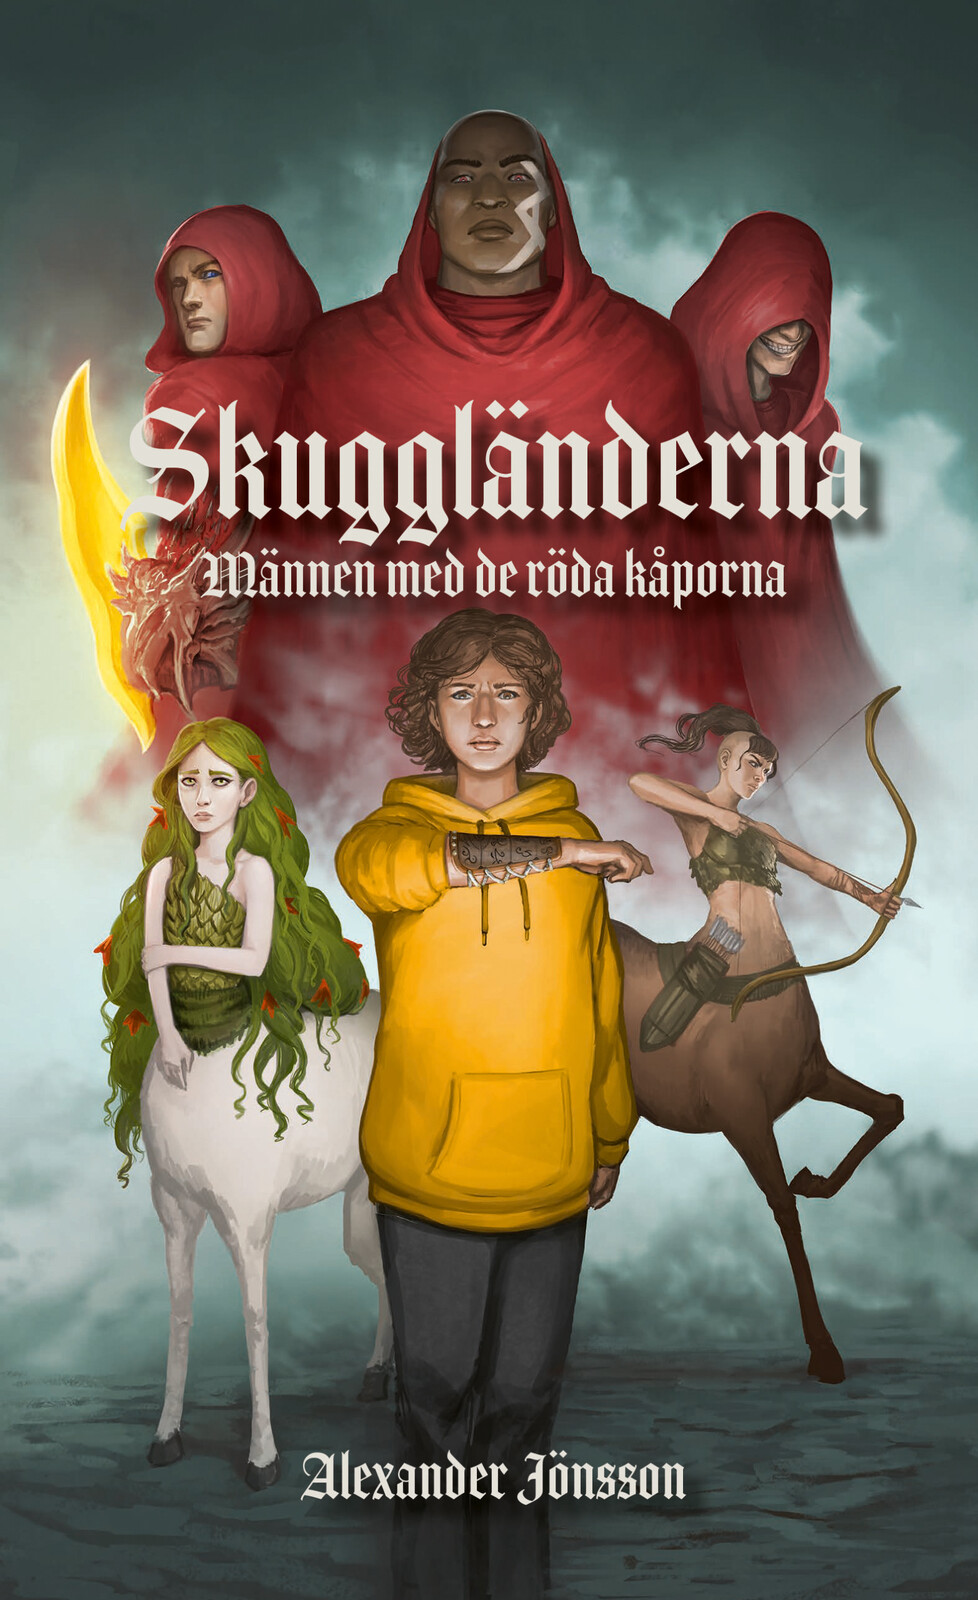 The final book cover with the covertext